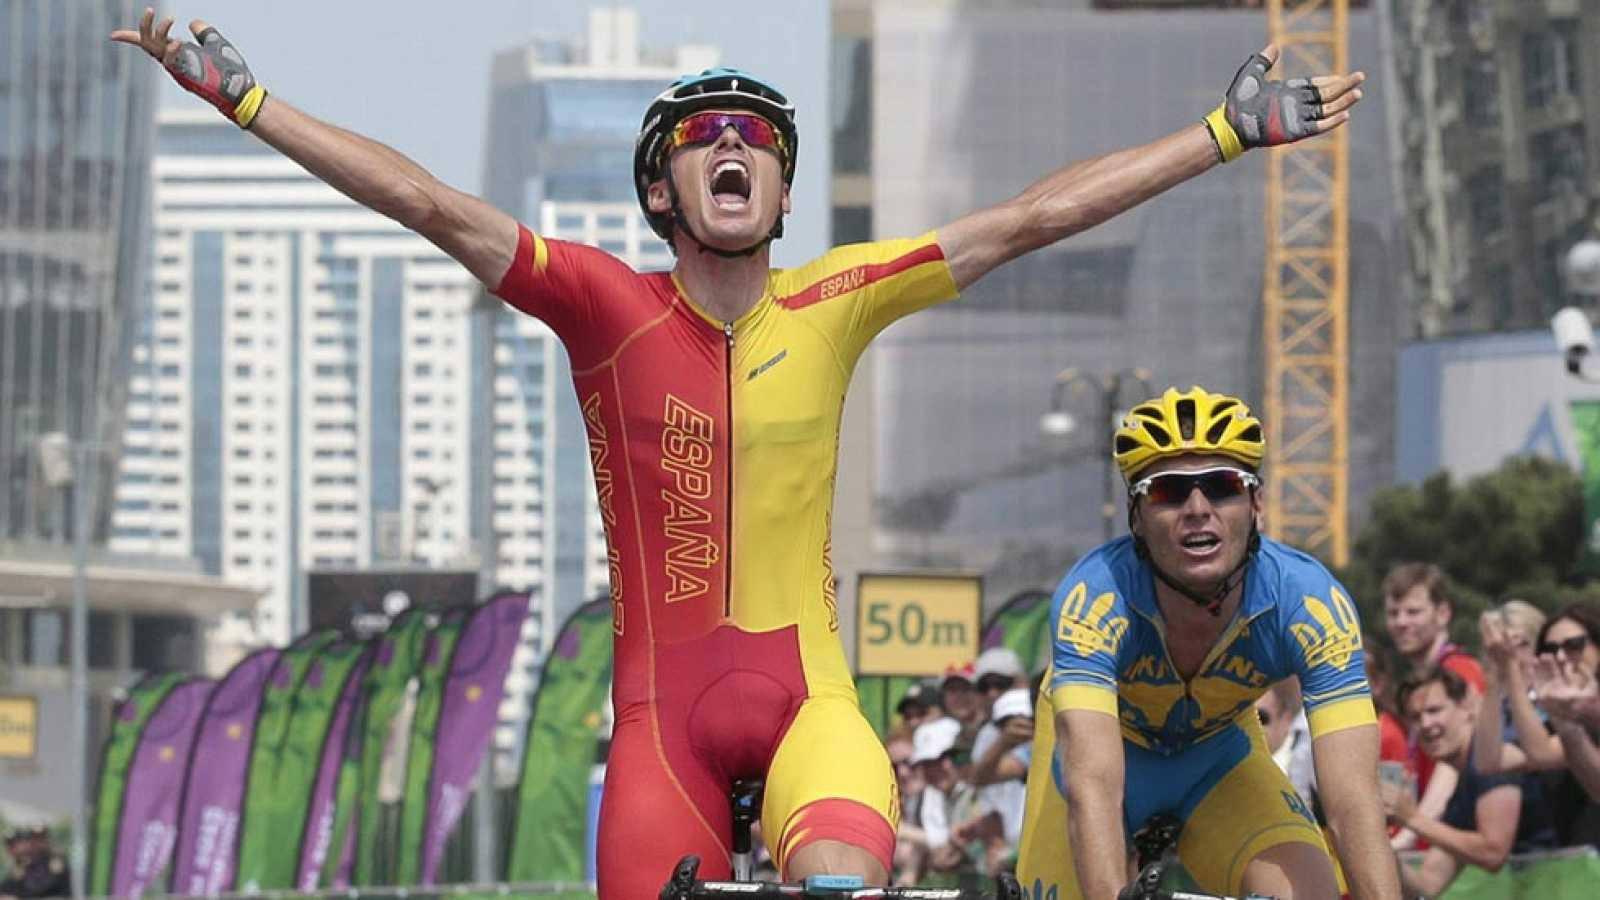 Luis León Sánchez celebrates victory in the men's cycling road race - one of eight European Games gold medals won by Spain at Baku 2015 as they finished 10th overall ©Getty Images